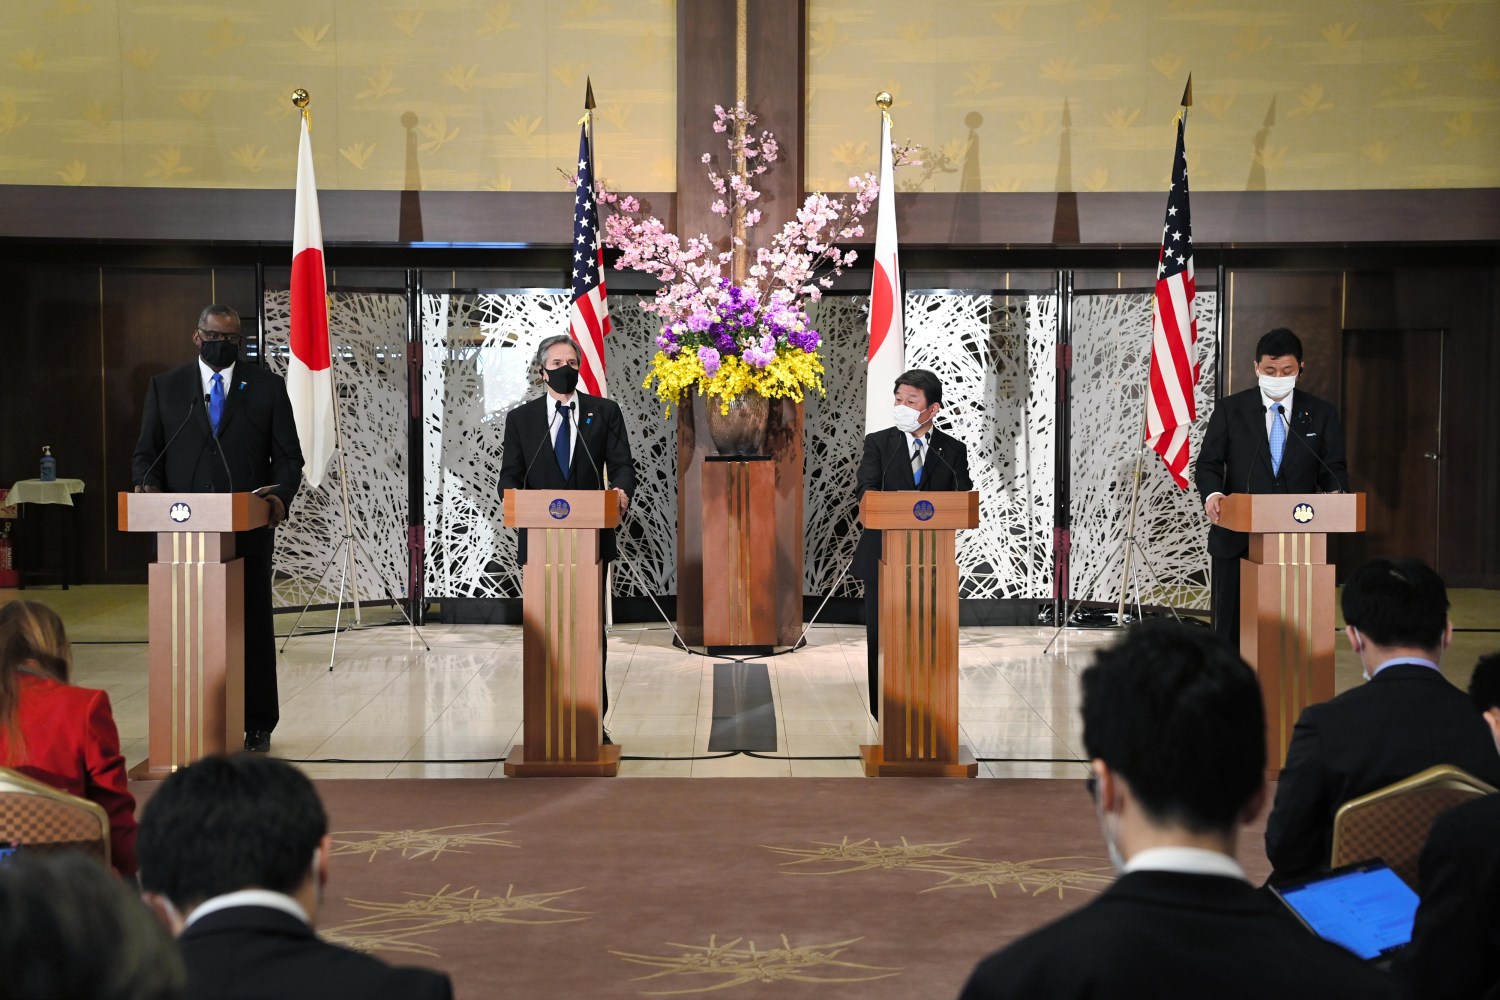 (L-R) US Defense Secretary Lloyd Austin (Lloyd James Austin III), US Secretary of State Antony Blinken (Antony John Blinken), Japanese Minister for Foreign Affairs Toshimitsu Motegi and Japan’s Defense Minister Nobuo Kishi attend a joint press conference after US - Japan Security Consultative Committee at Iikura Guest House in Tokyo on March 16, 2021. All of them wear face masks amid a pandemic of the new coronavirus COVID-19.   ( The Yomiuri Shimbun )